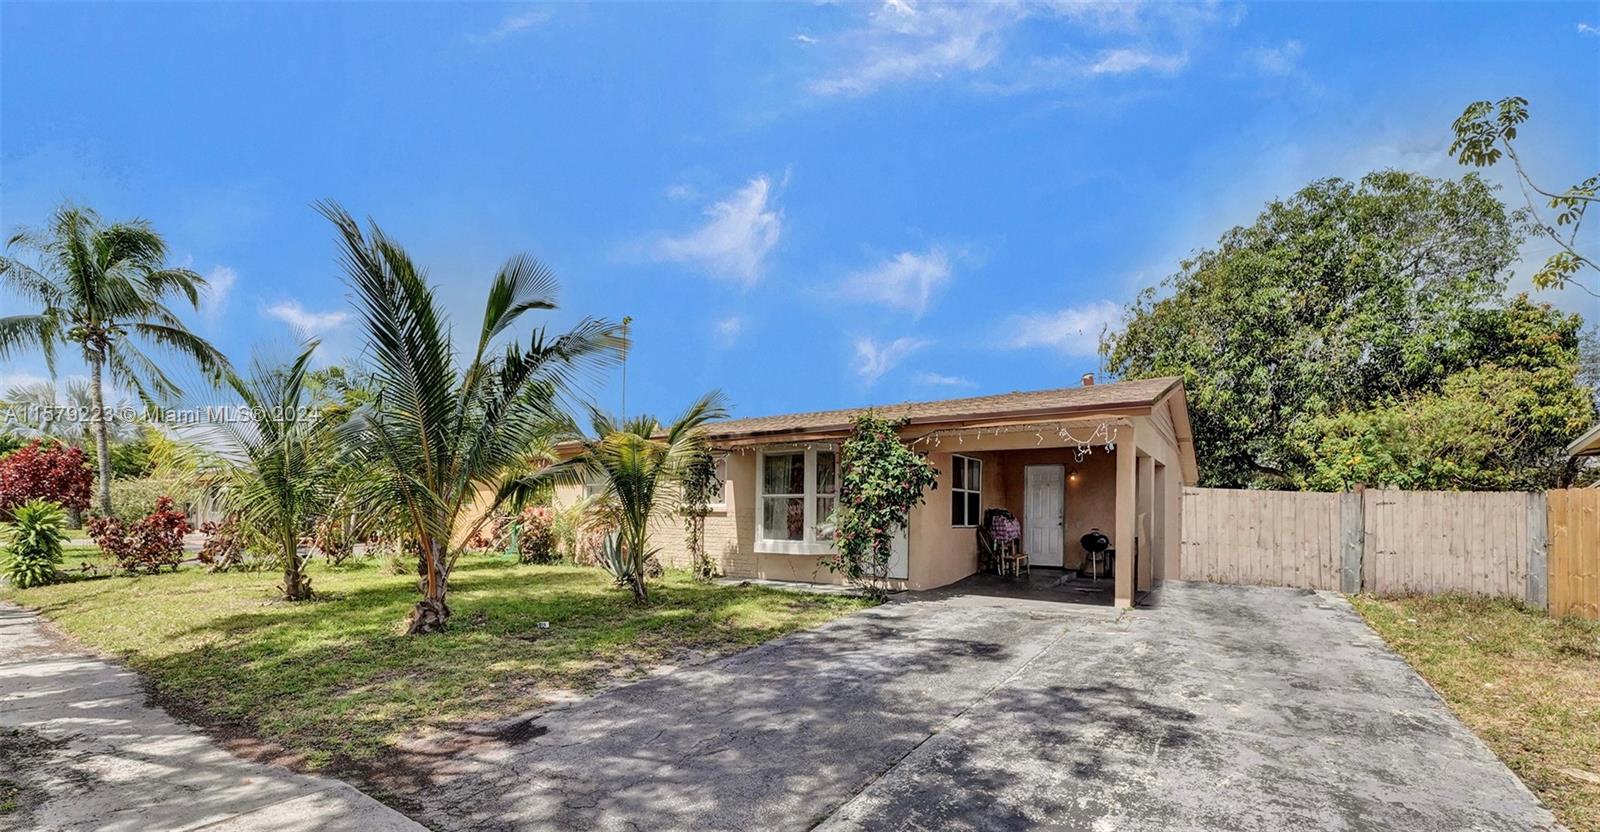 1731 Nw 27th Ave, Fort Lauderdale, Broward County, Florida - 3 Bedrooms  
2 Bathrooms - 